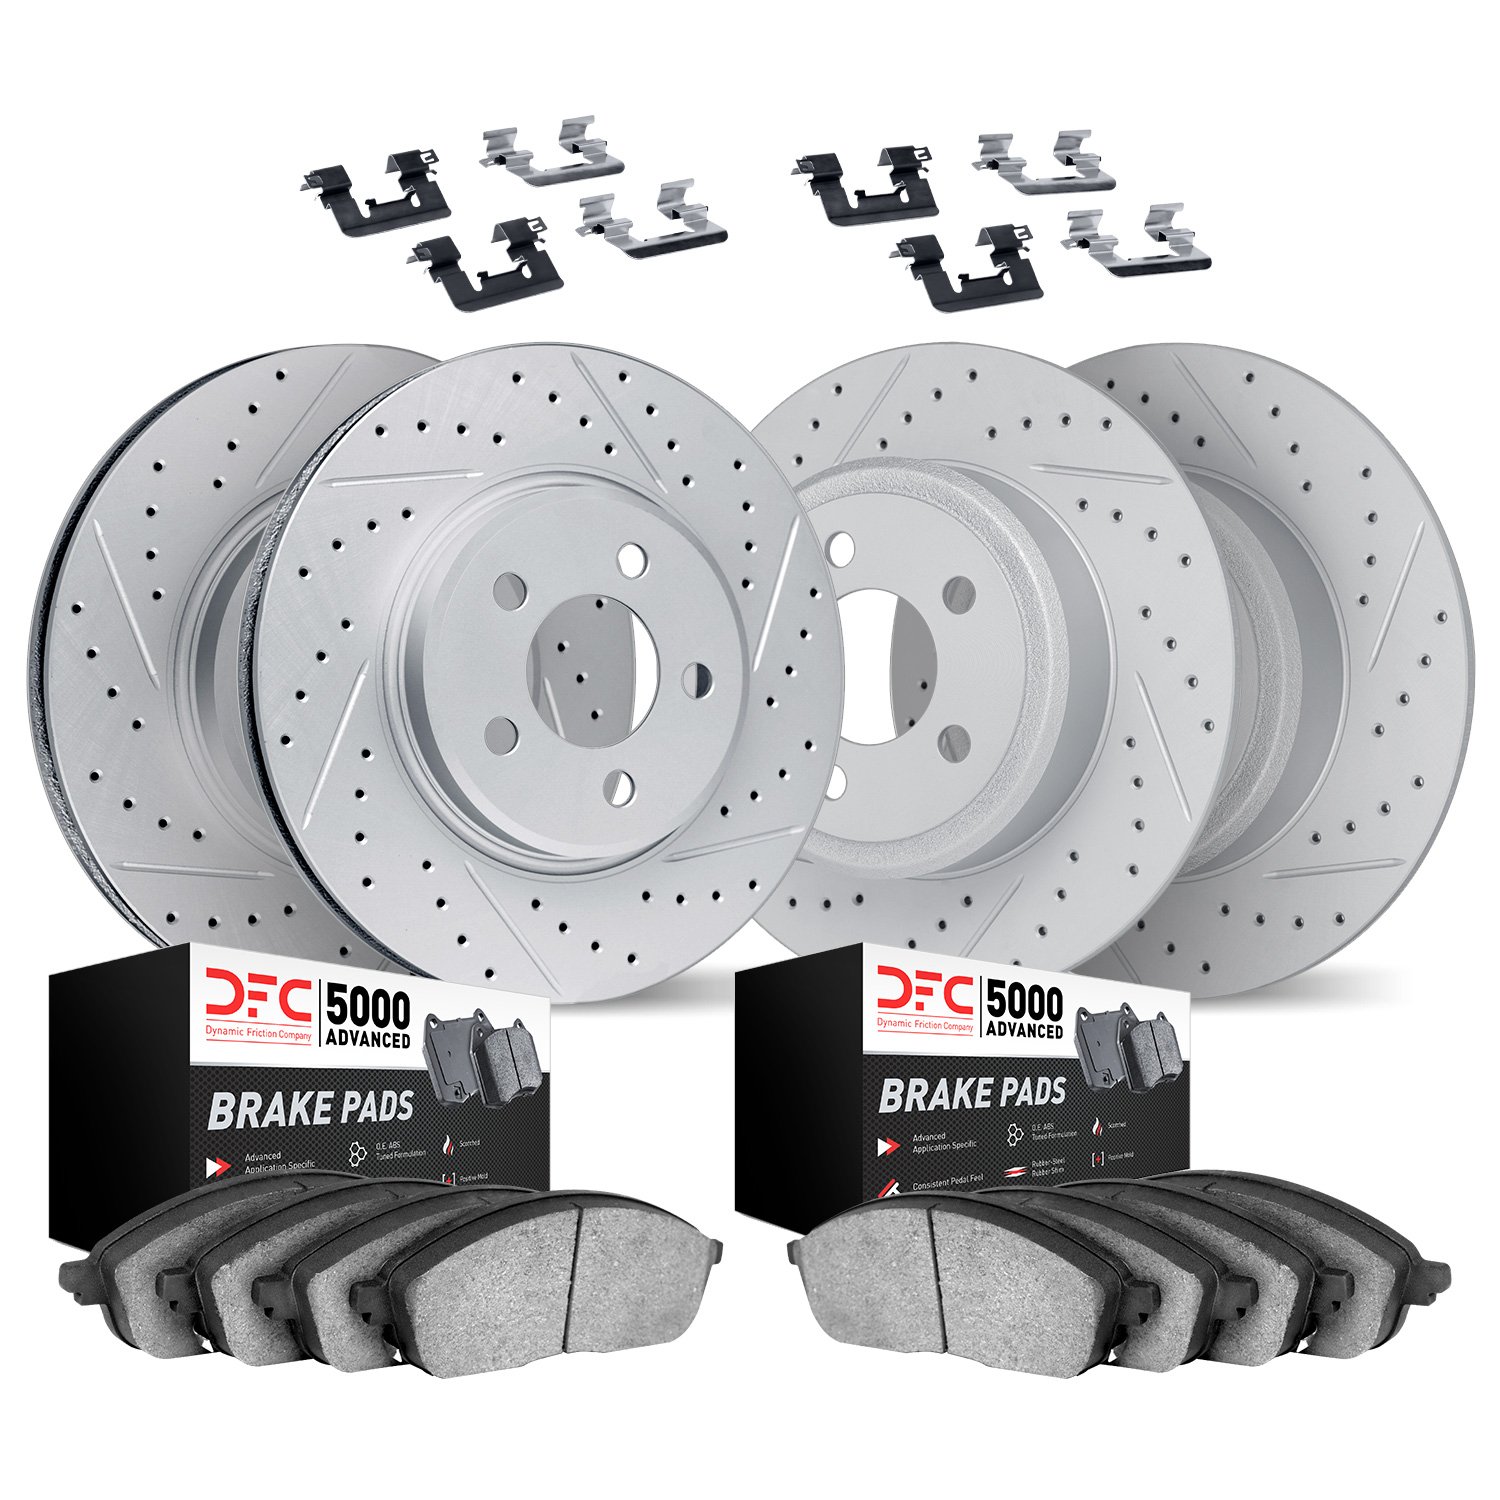 2514-59082 Geoperformance Drilled/Slotted Rotors w/5000 Advanced Brake Pads Kit & Hardware, 2007-2015 Acura/Honda, Position: Fro